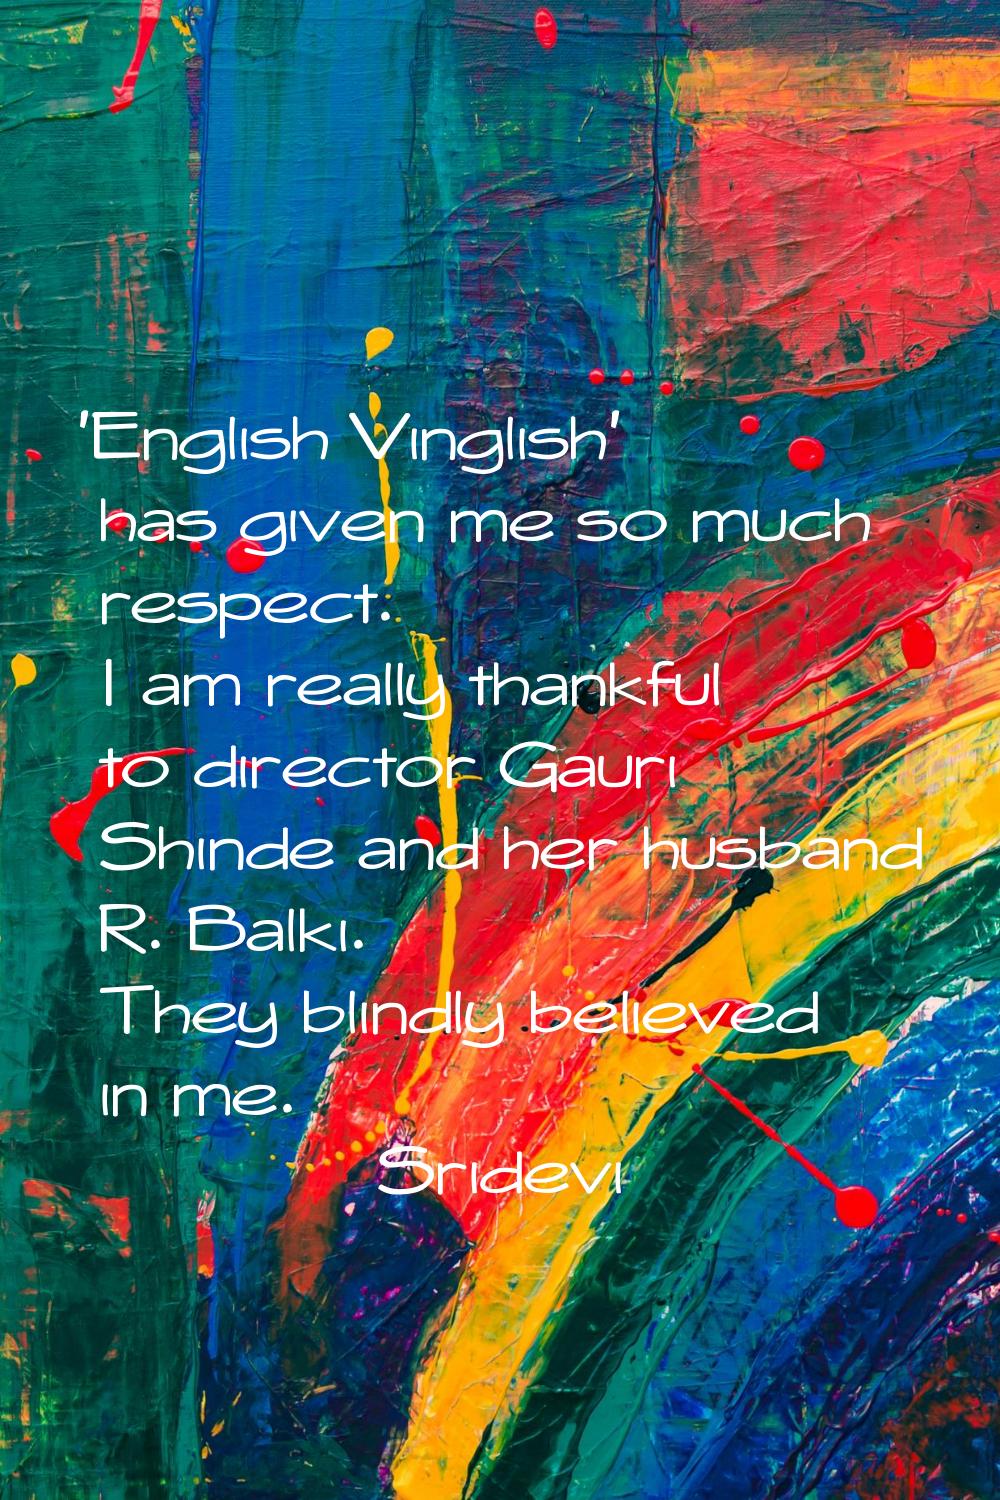 'English Vinglish' has given me so much respect. I am really thankful to director Gauri Shinde and 